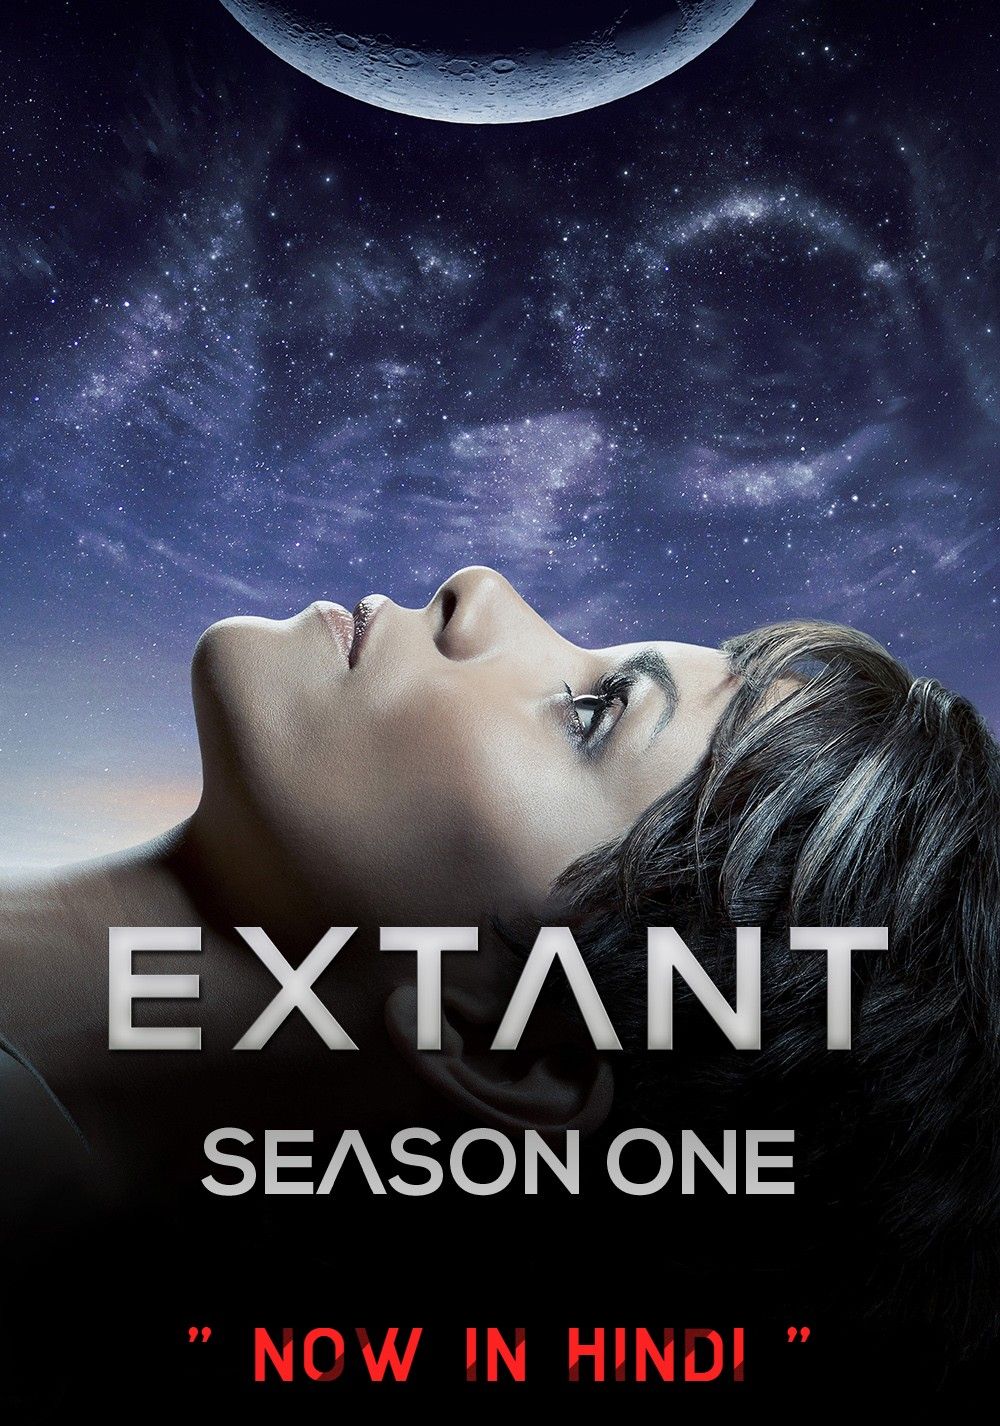 Extant (Season 1) Hindi Dubbed Complete All Episodes download full movie